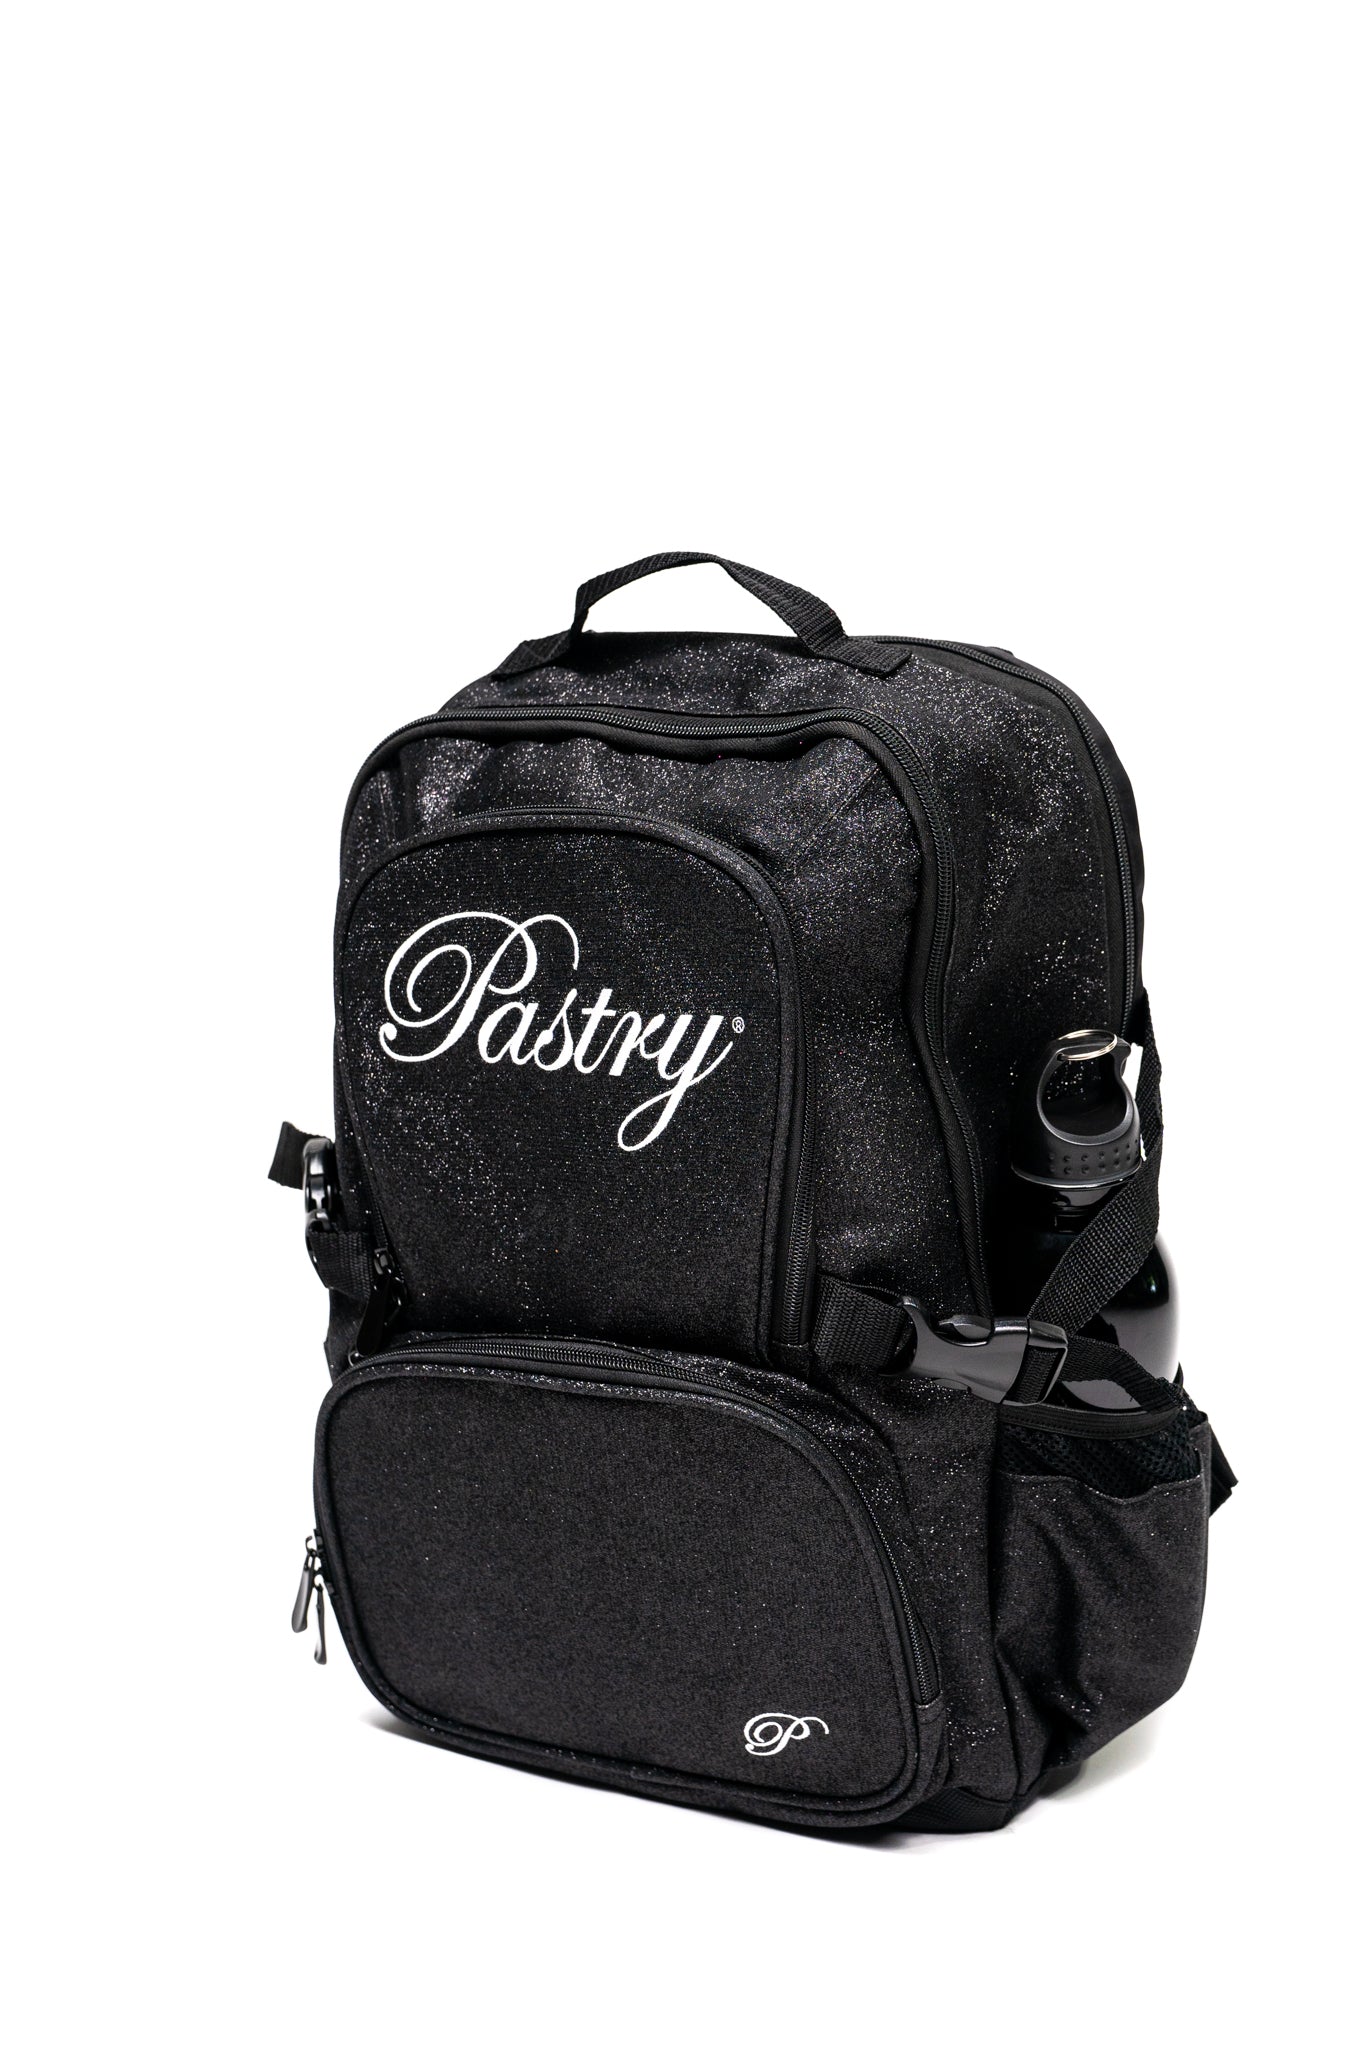 Pastry Backpack Glitter Black with tumbler